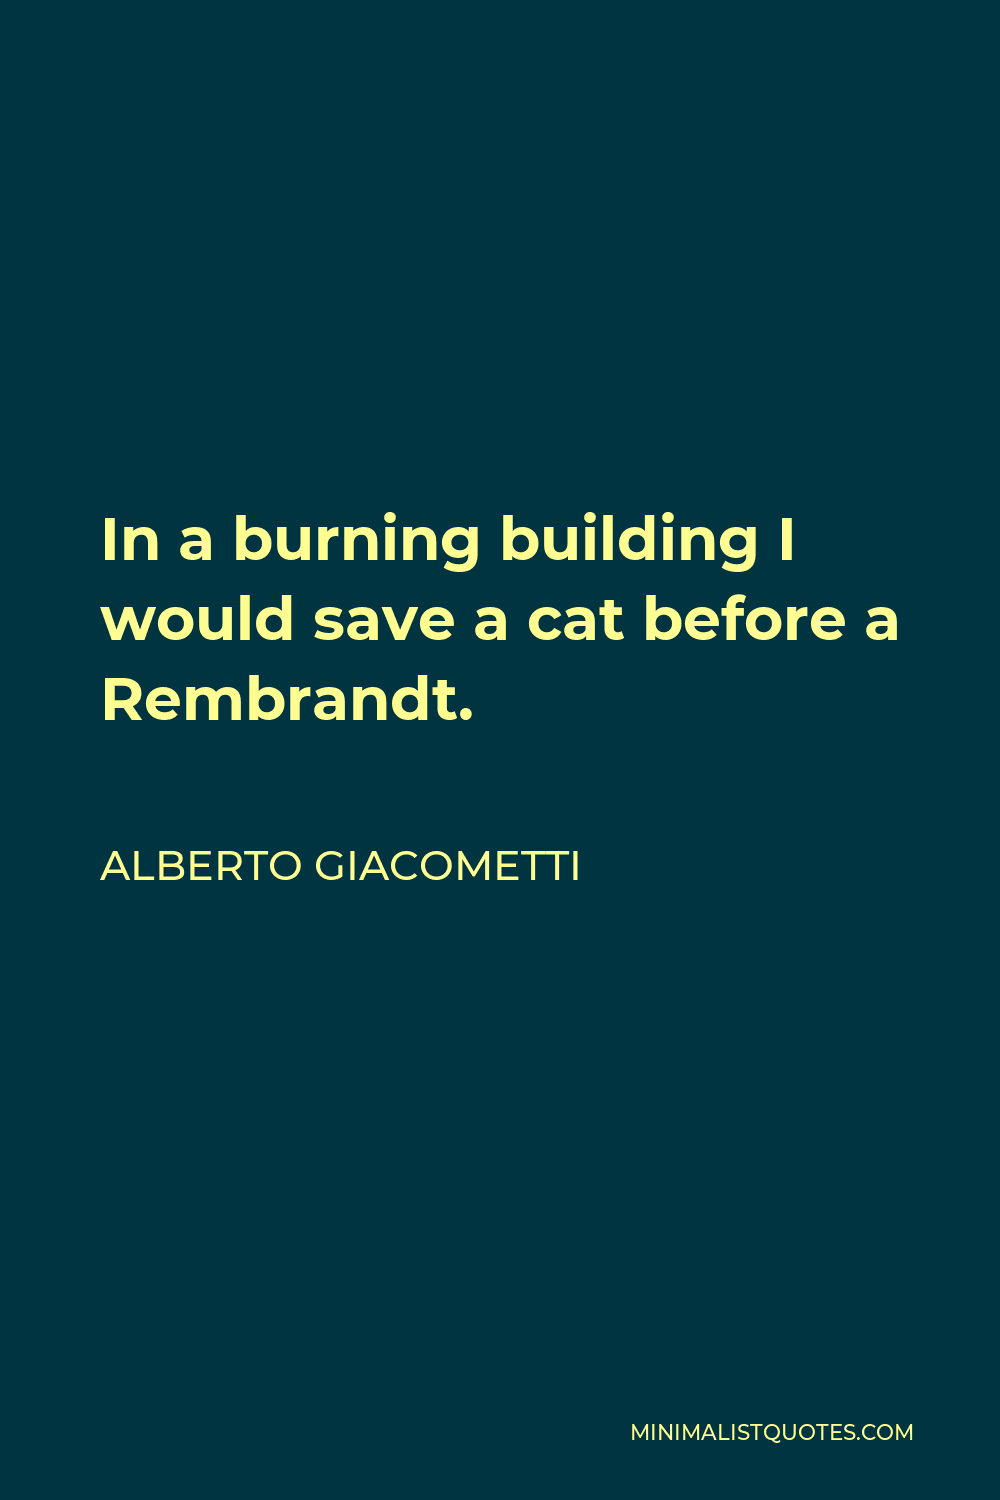 Alberto Giacometti Quote - In a burning building I would save a cat before a Rembrandt.